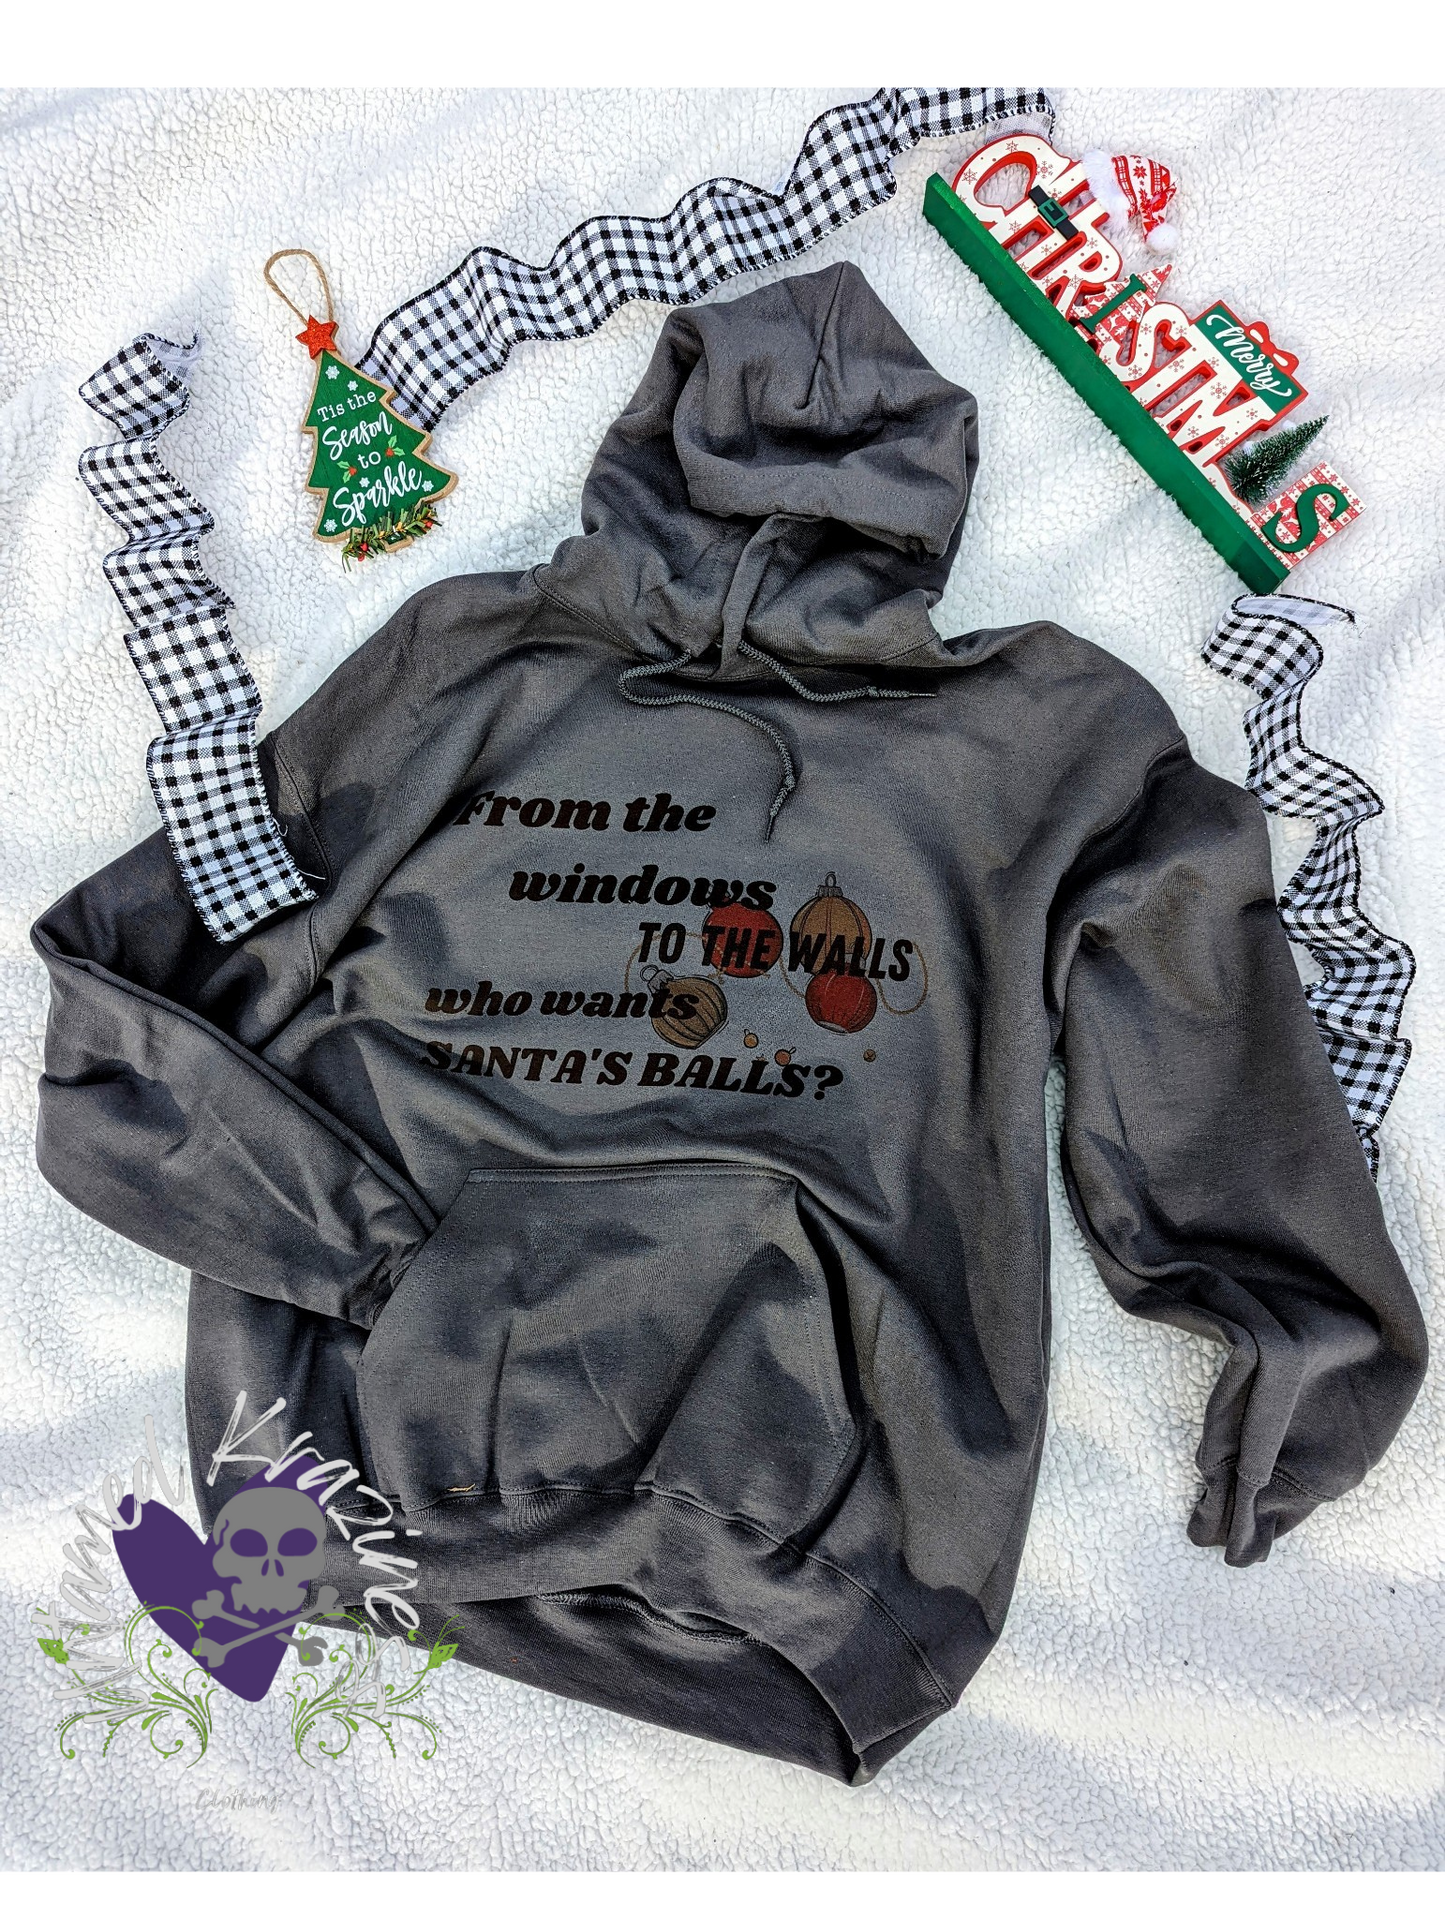 From the windows to the walls, who wants Santa's balls? Hoodie